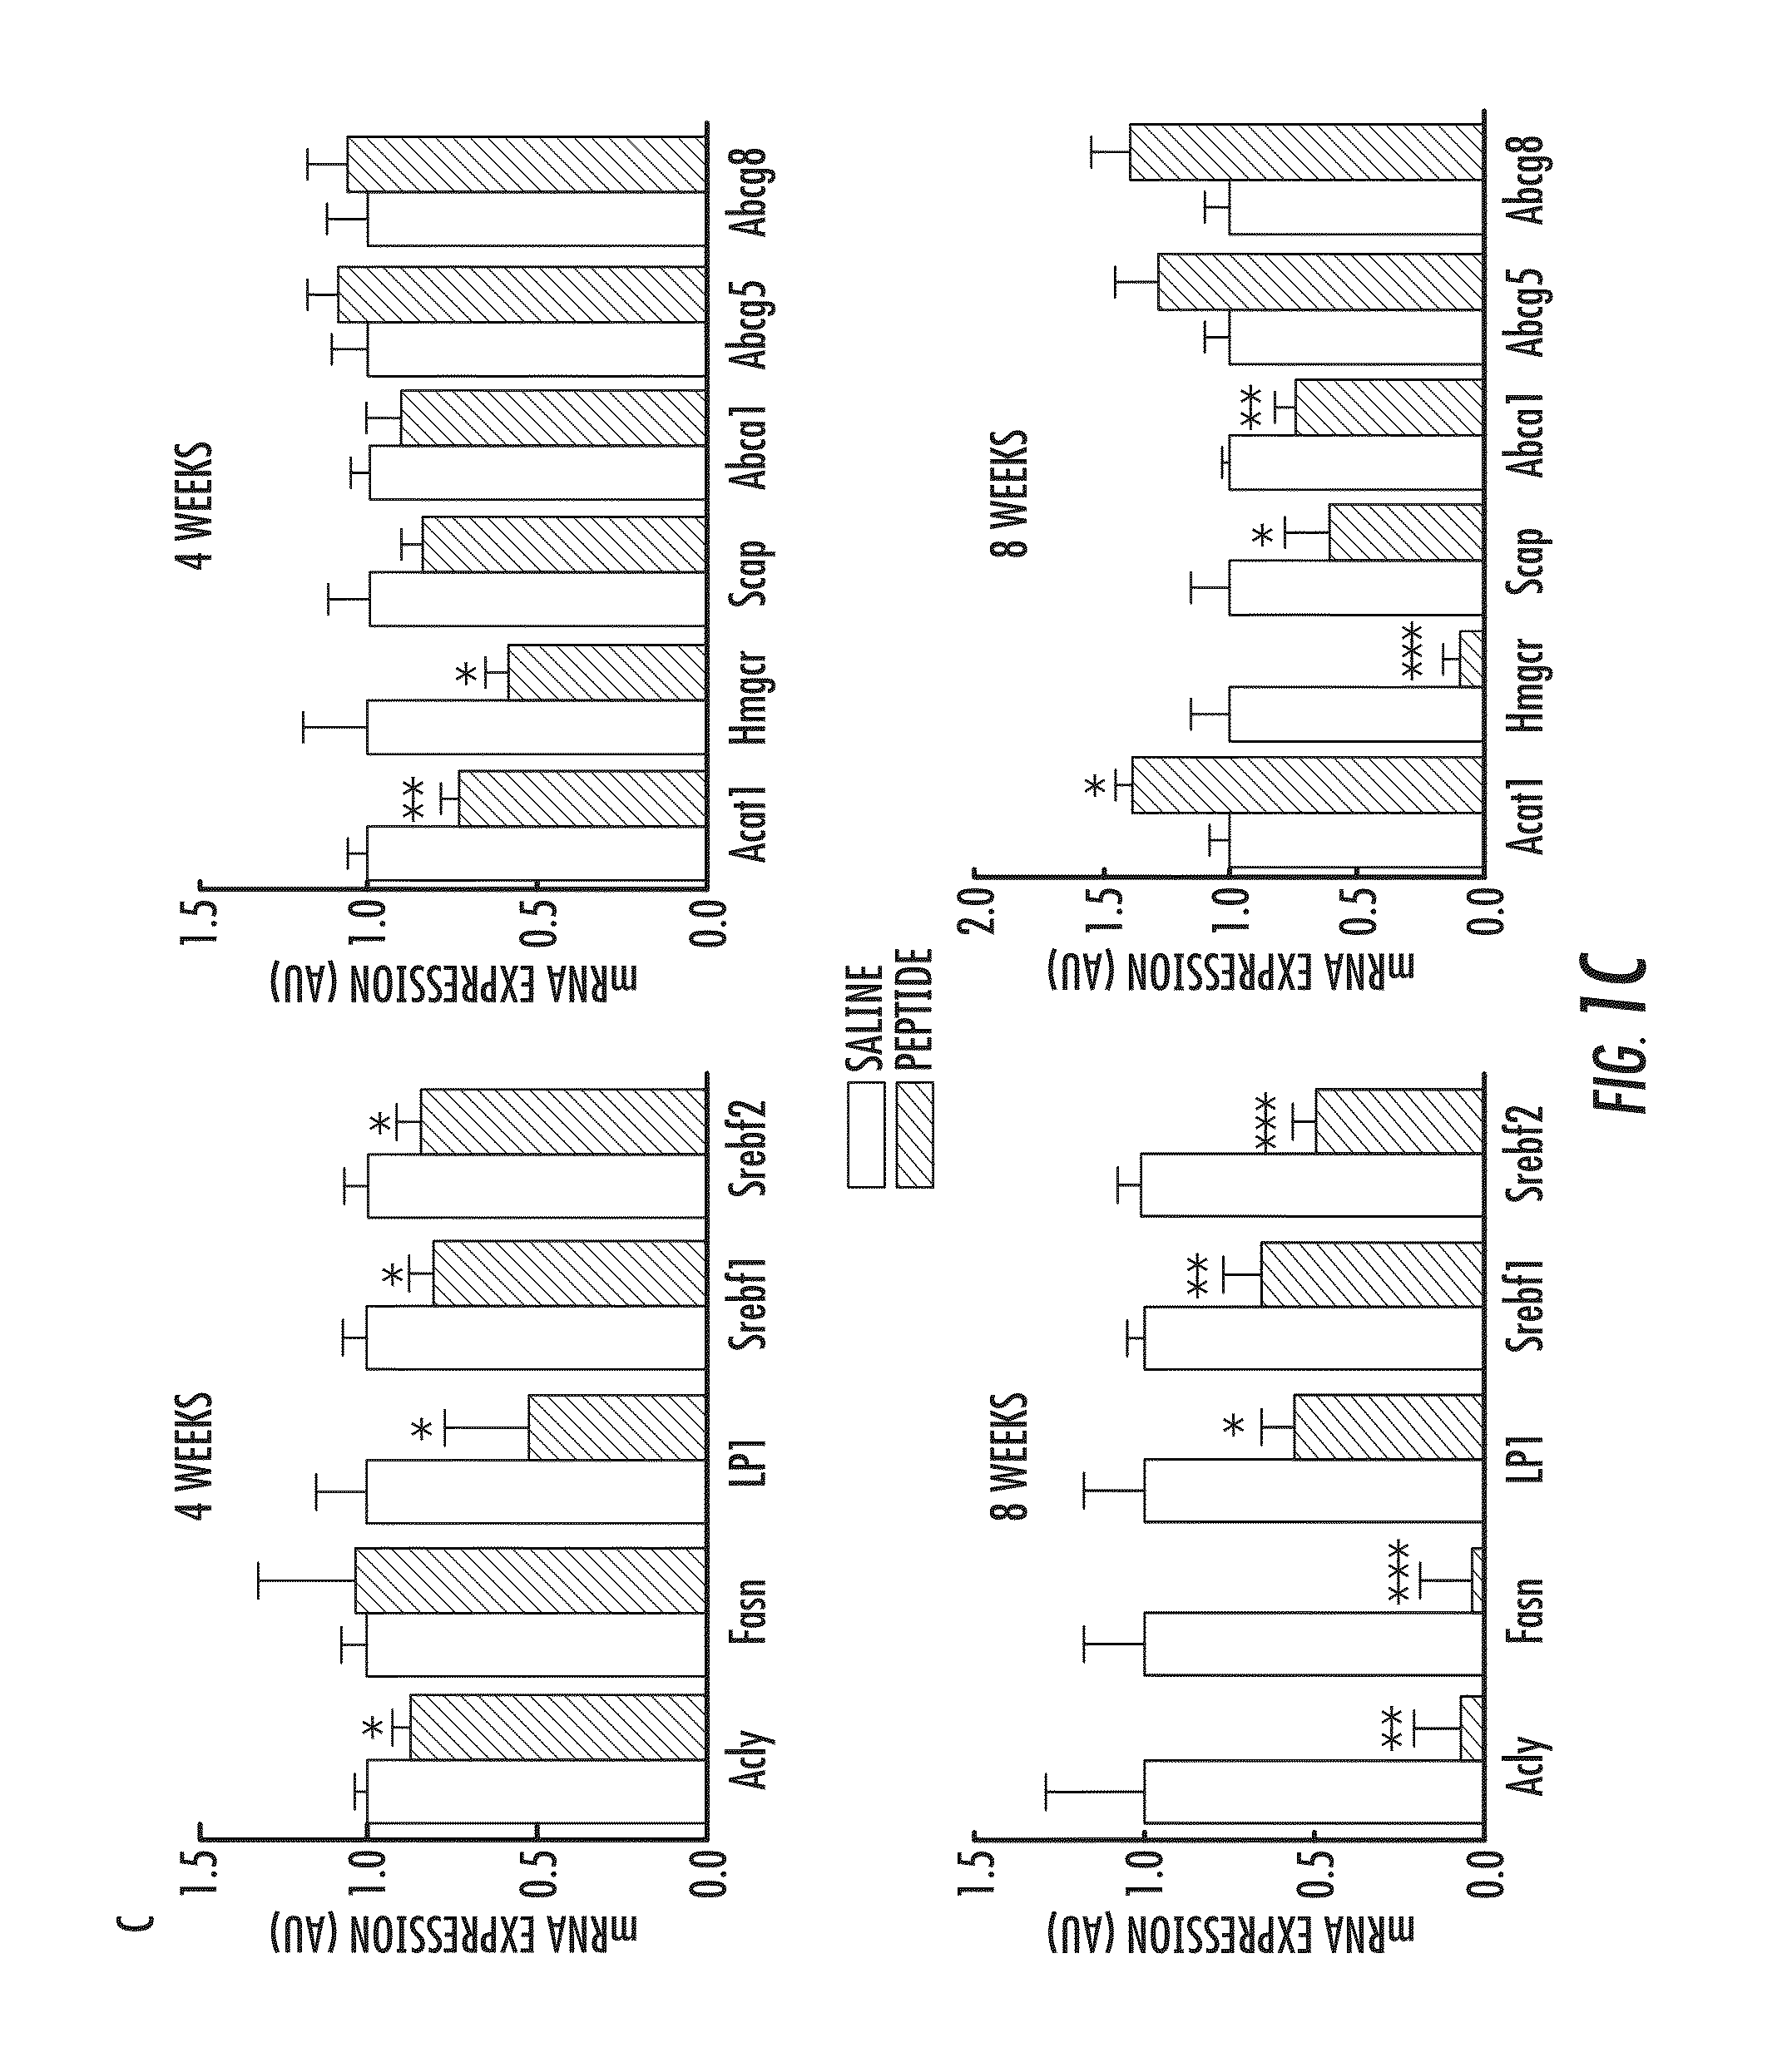 Compositions and methods for treating and preventing hyperlipidemia, fatty liver, atherosclerosis and other disorders associated with metabolic syndrome